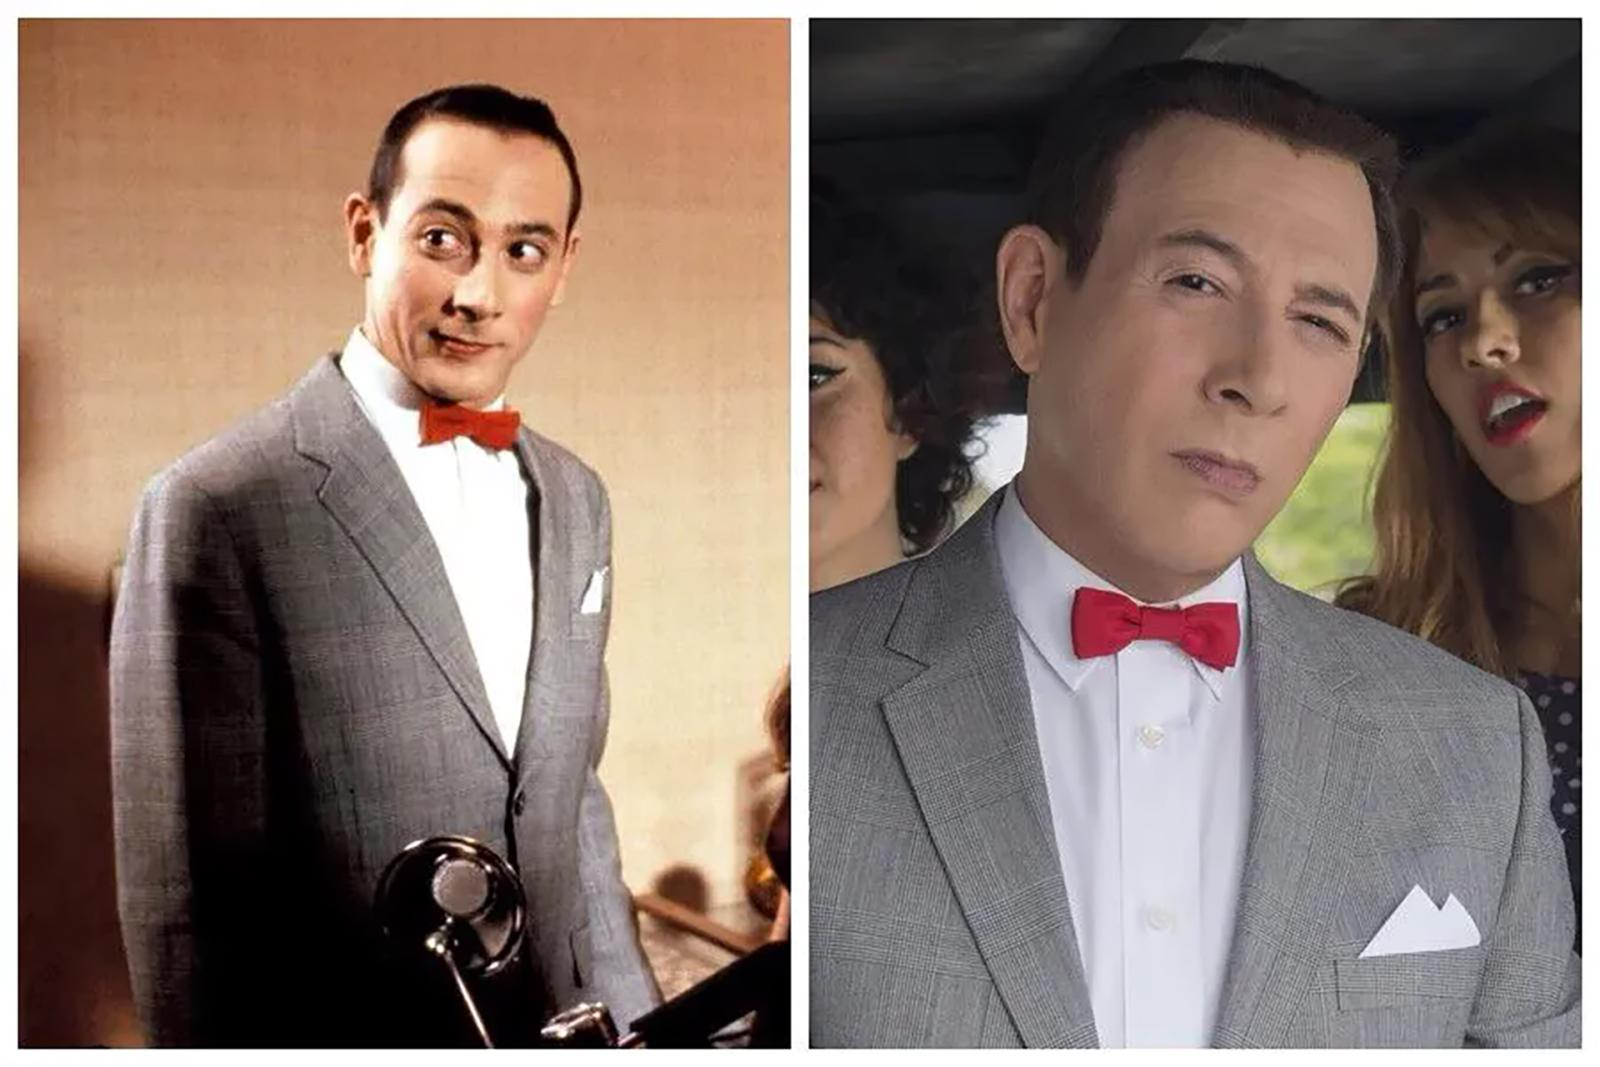 10 Times The Actors Were De-Aged For a Role And Looked Way Too Creepy - image 9